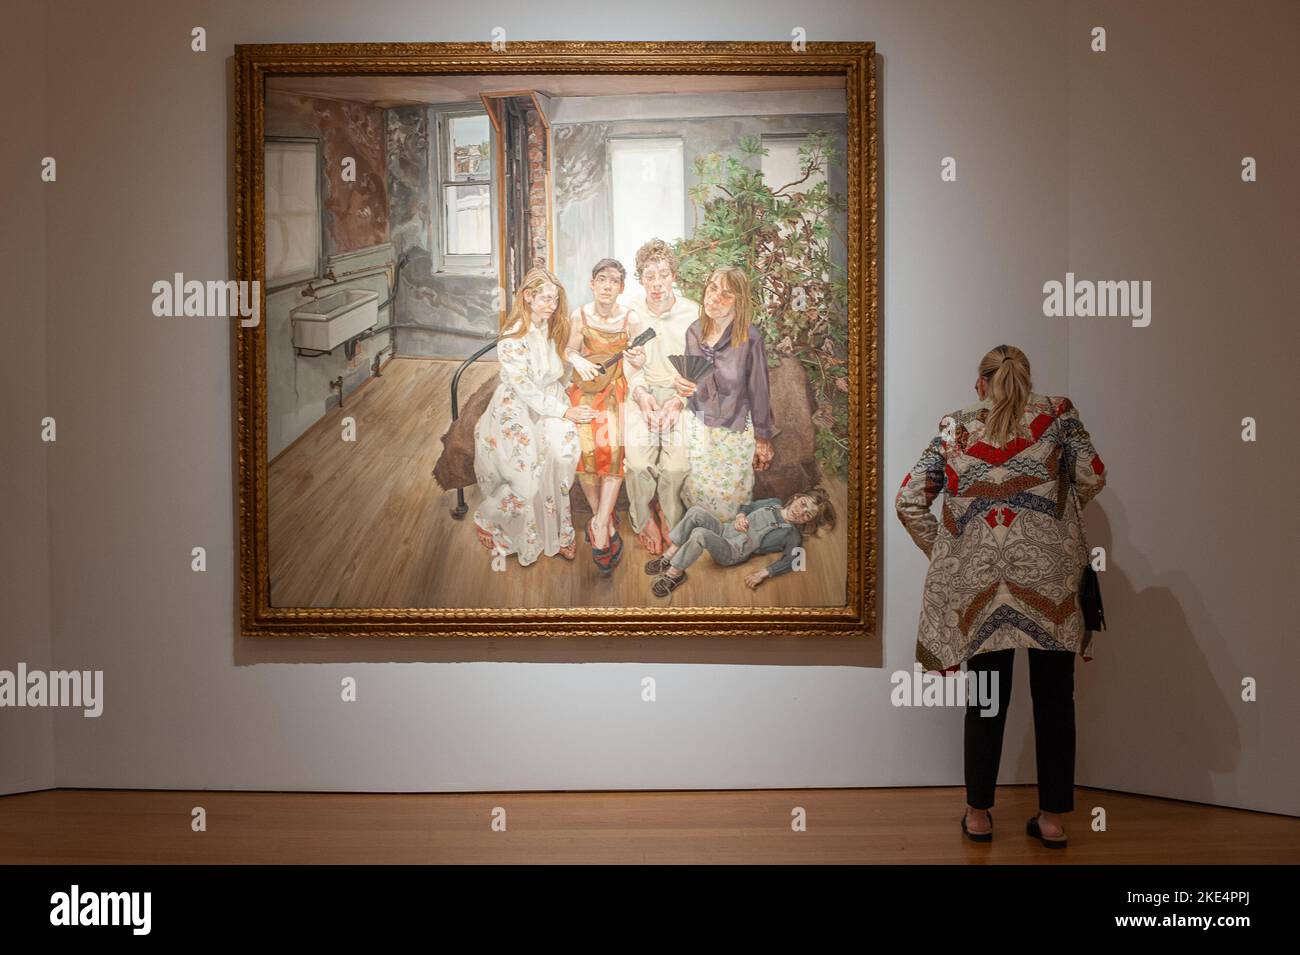 On Nov. 9, 2022 this lot item sold for $86 million. Lucian Freud (1922-2011) Large Interior, W11 (after Watteau) oil on canvas 72¼ x 78 in. (185.4 x 198.1 cm.) Painted in 1981-1983 on the wall at Visionary: The Paul G. Allen Collection presented at Christie's New York Galleries in Rockefeller Center in New York, NY on Nov. 8, 2022. The auction is set to take place Nov 9-10, 2022 and it has been valued in excess of $1 billion. The collection of philanthropist Paul G. Allen, co-founder of Microsoft, includes more than 150 masterpieces spanning 500 years of art history. All proceeds will go to ph Stock Photo